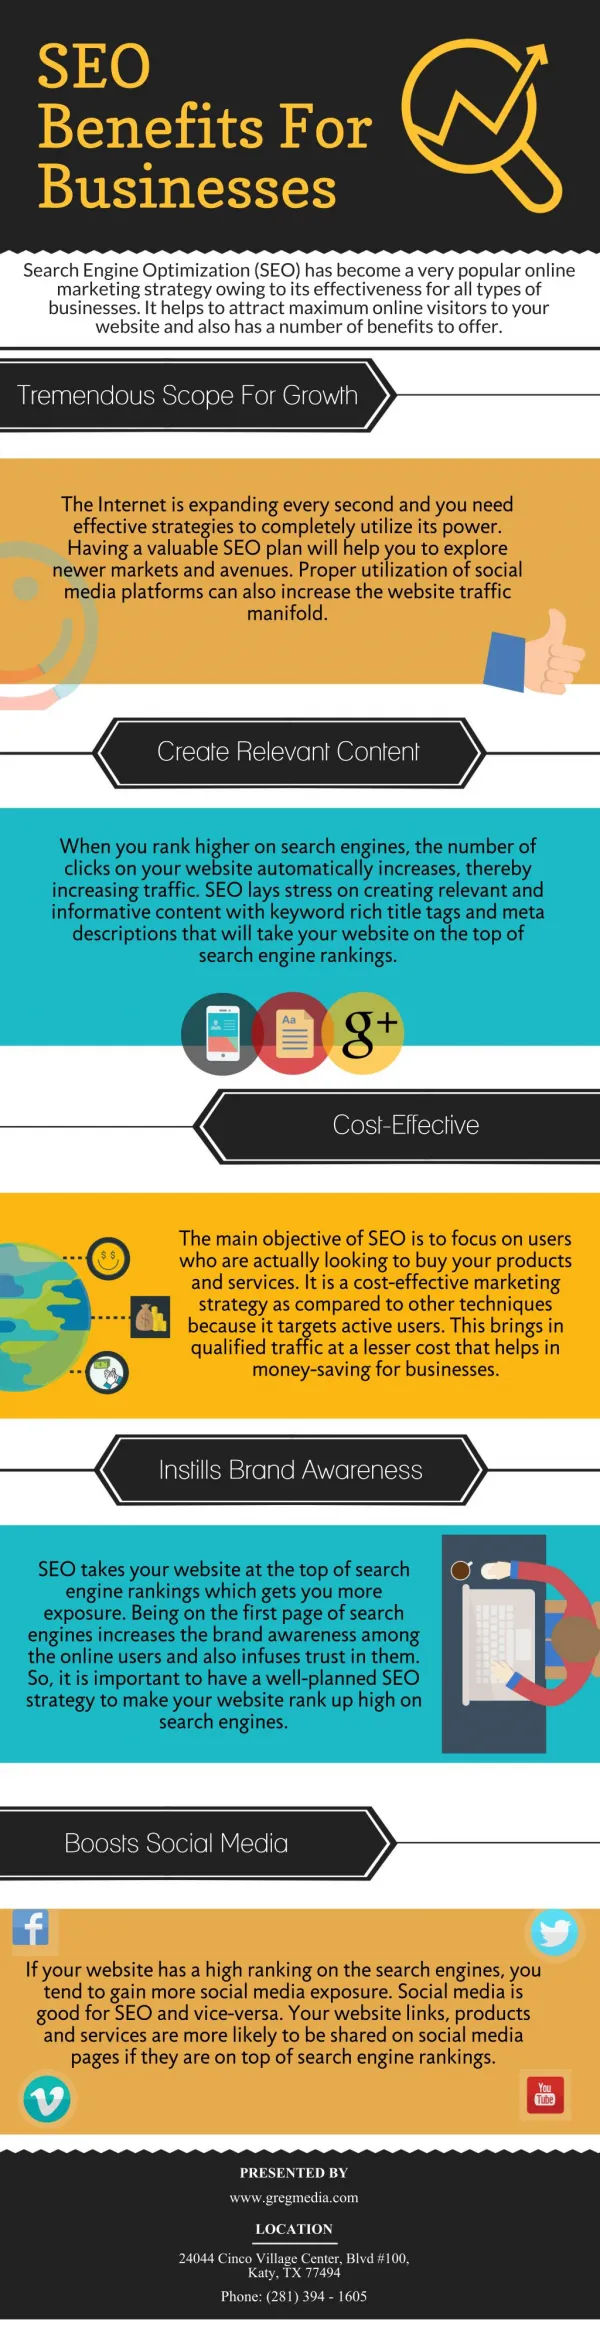 SEO Benefits For Businesses